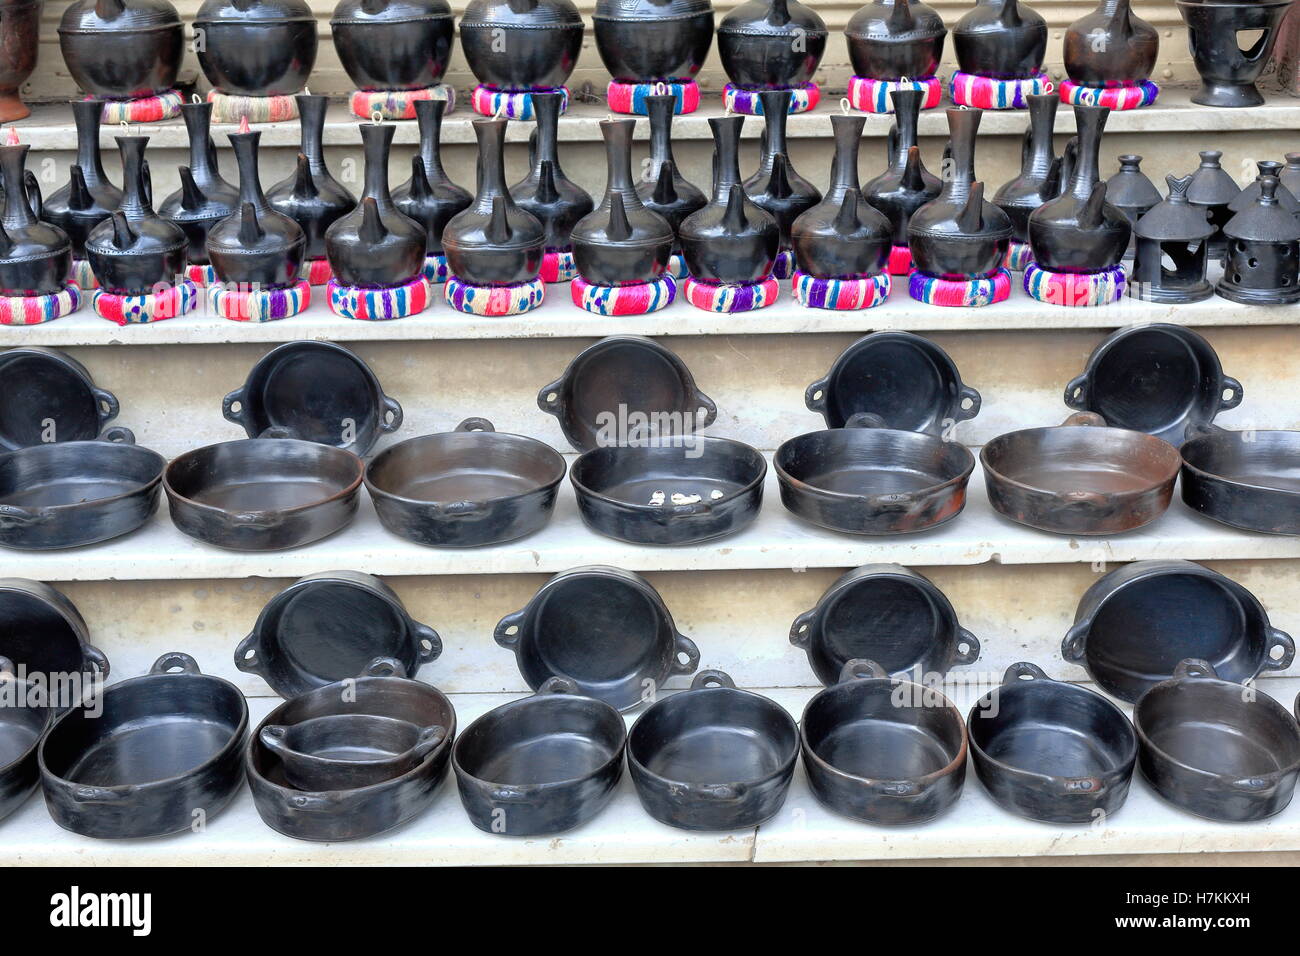 Black pottery jebenas-containers for boiling the buna-traditional Ethiopian coffee along with pans for the toasting of the beans Stock Photo